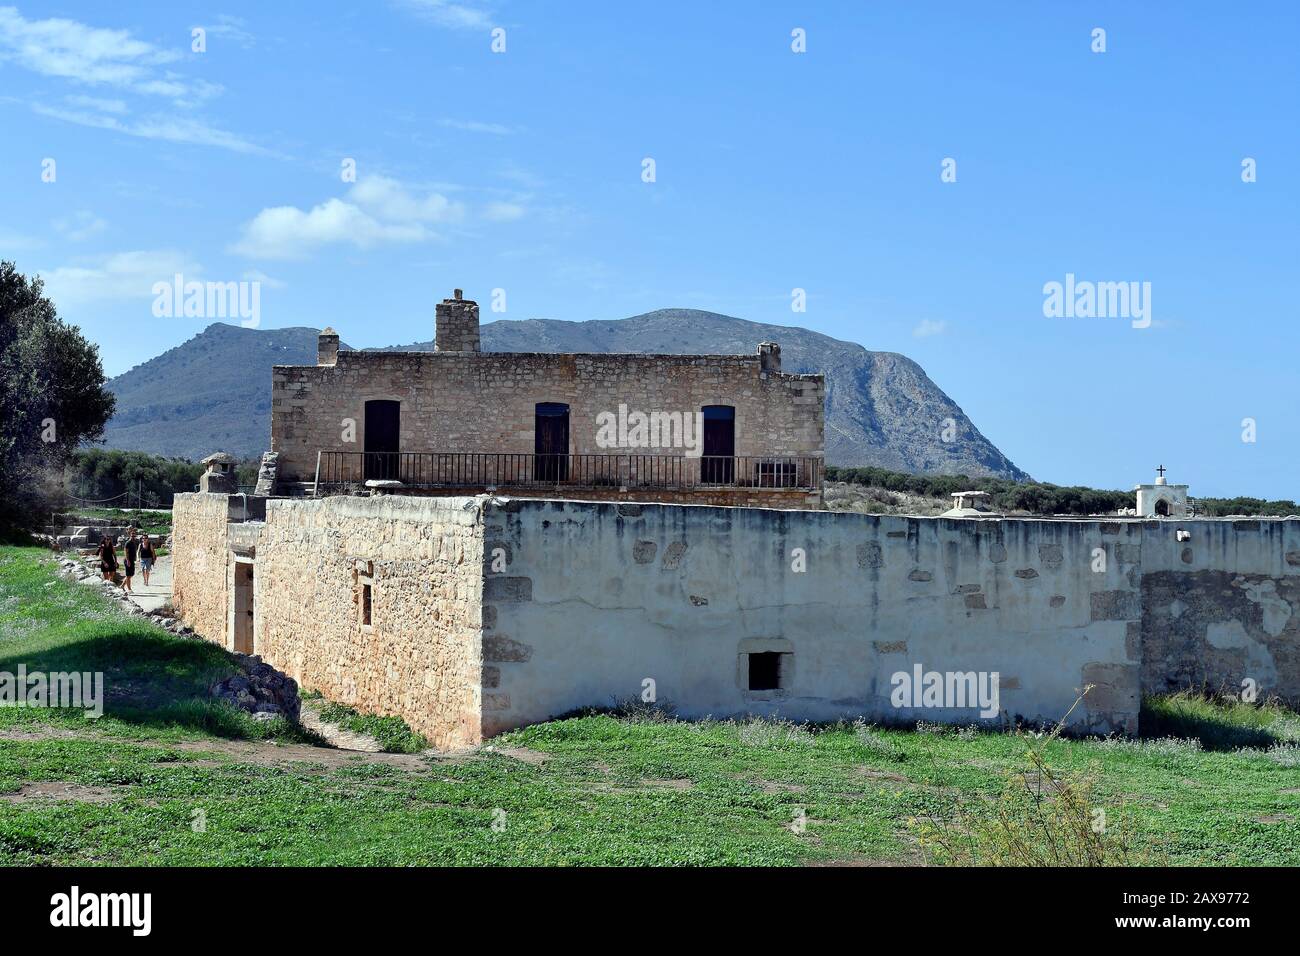 Chania, Greece - October 06, 2018: Unidentified tourists visit old monastery St. John the Theologian in ancient archaelogical site of Aptera in Crete Stock Photo